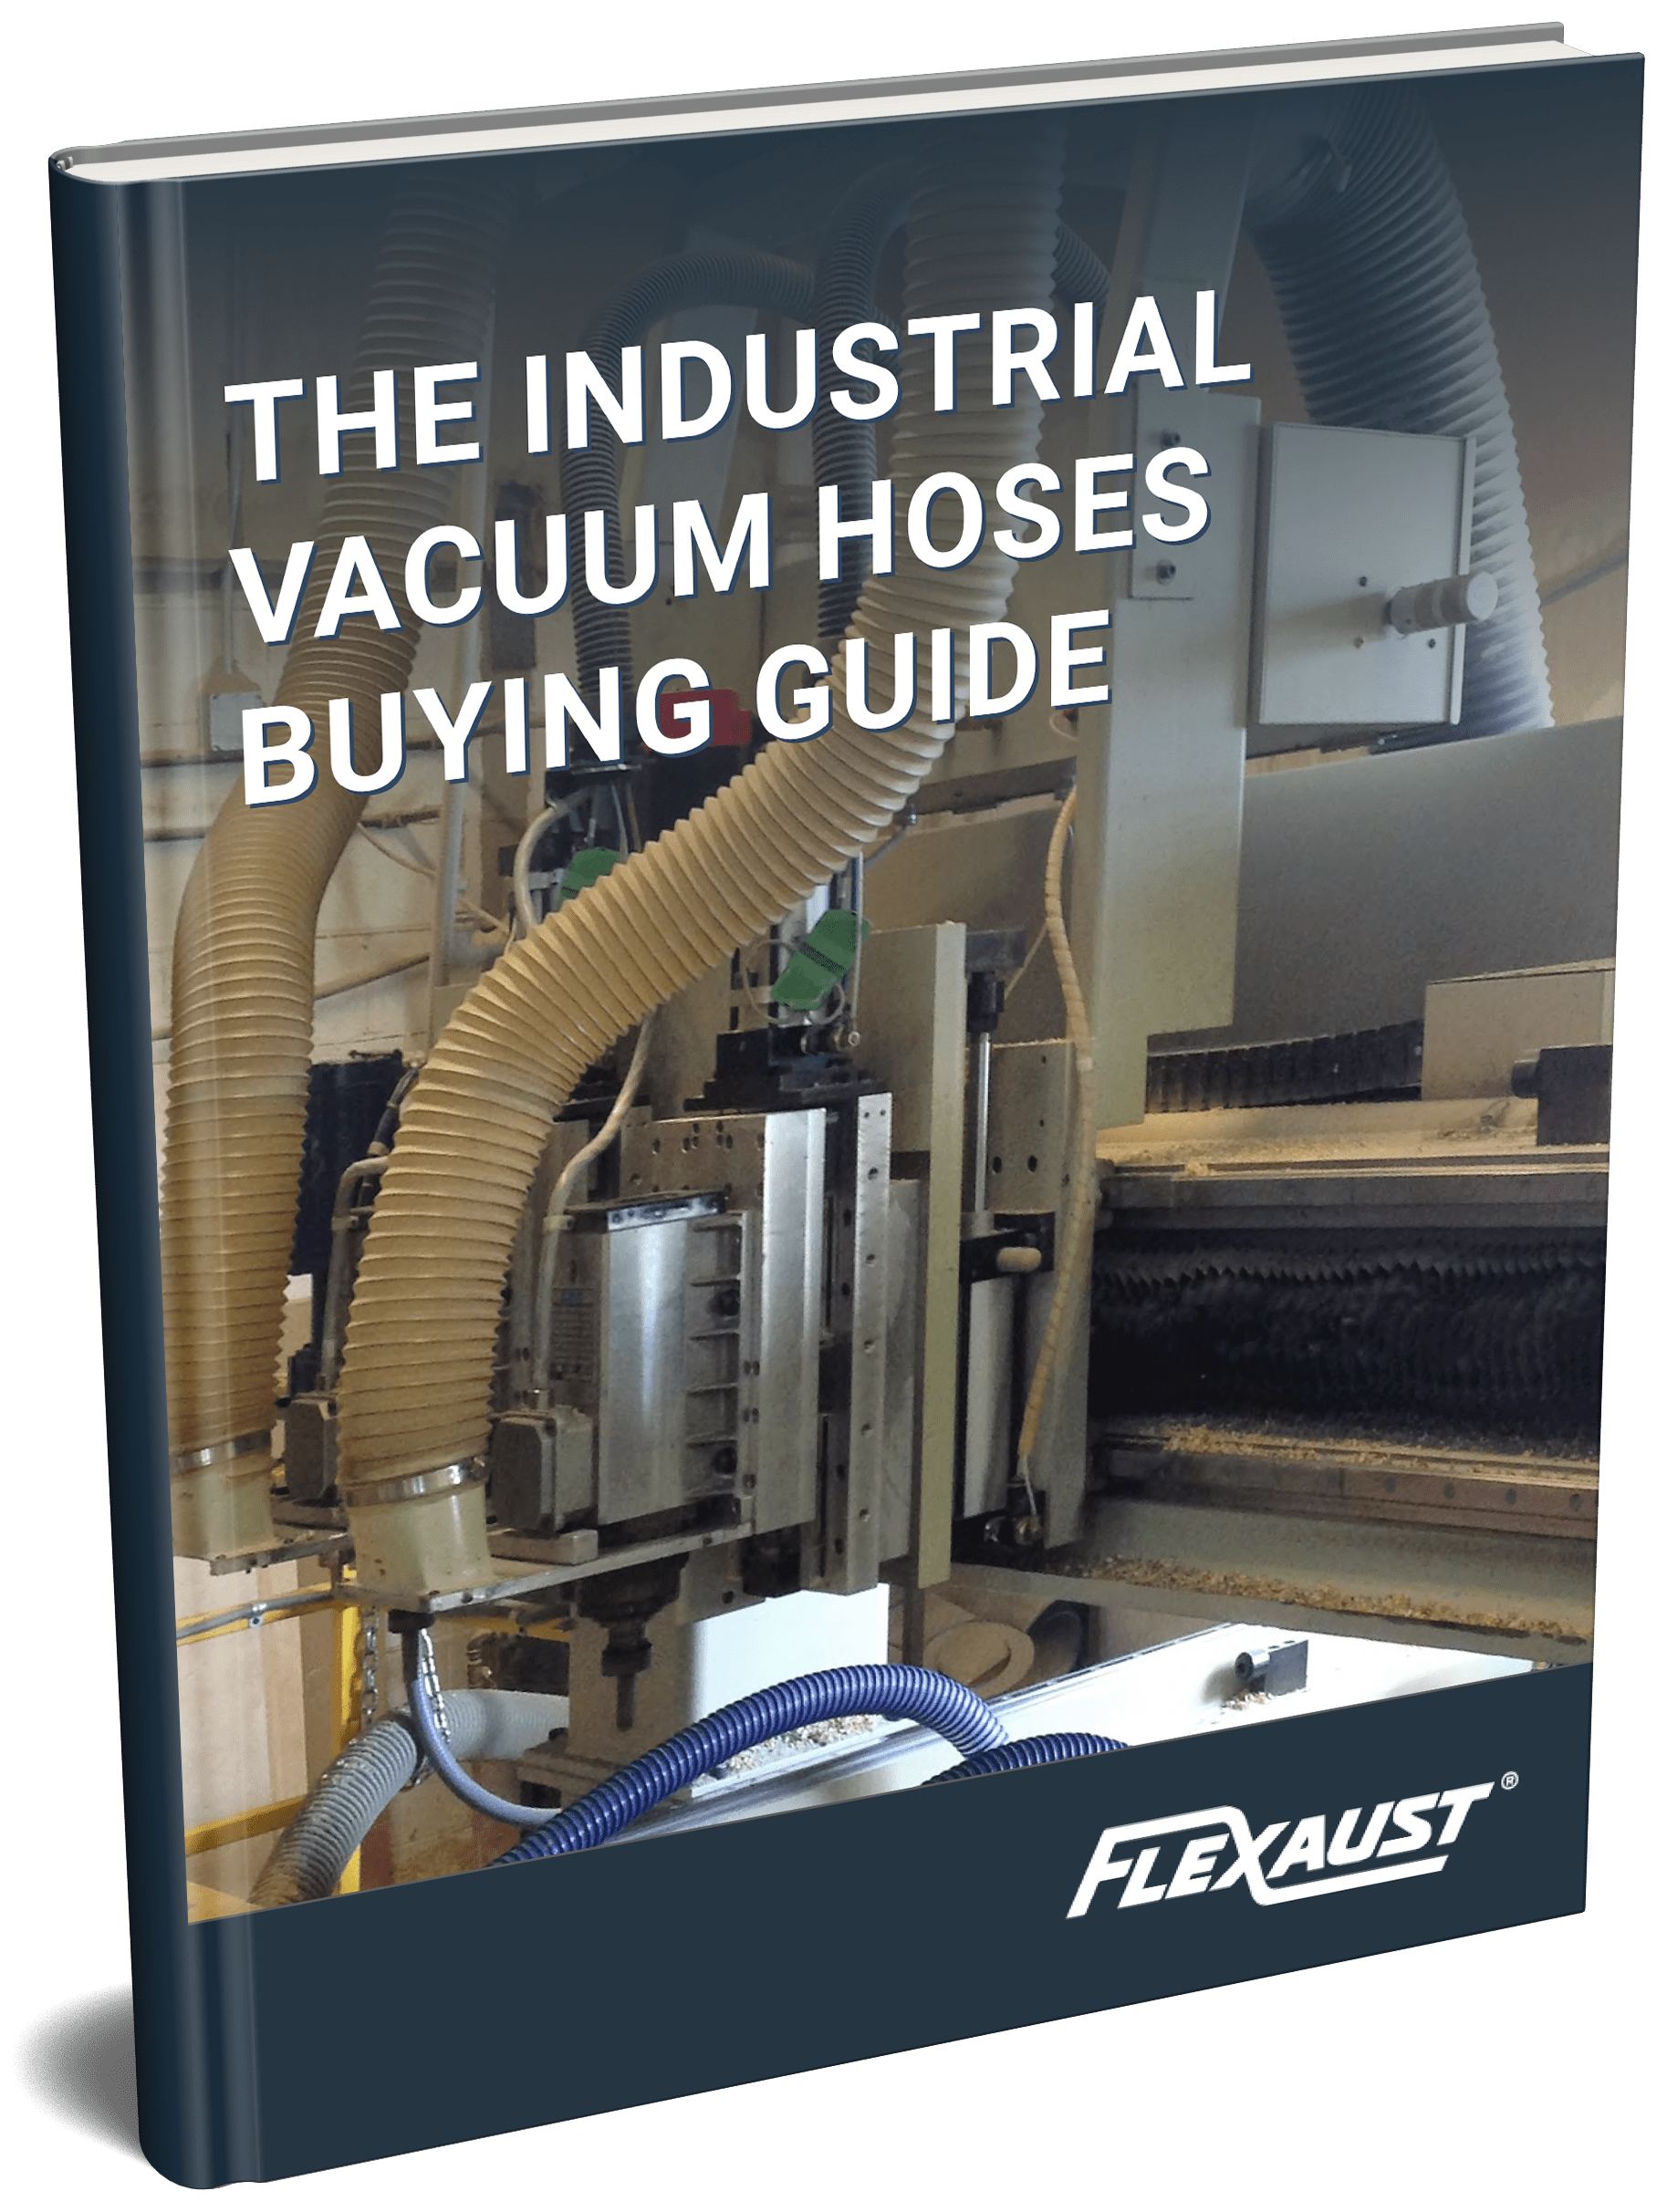 The Industrial Vacuum Hoses Buying Guide